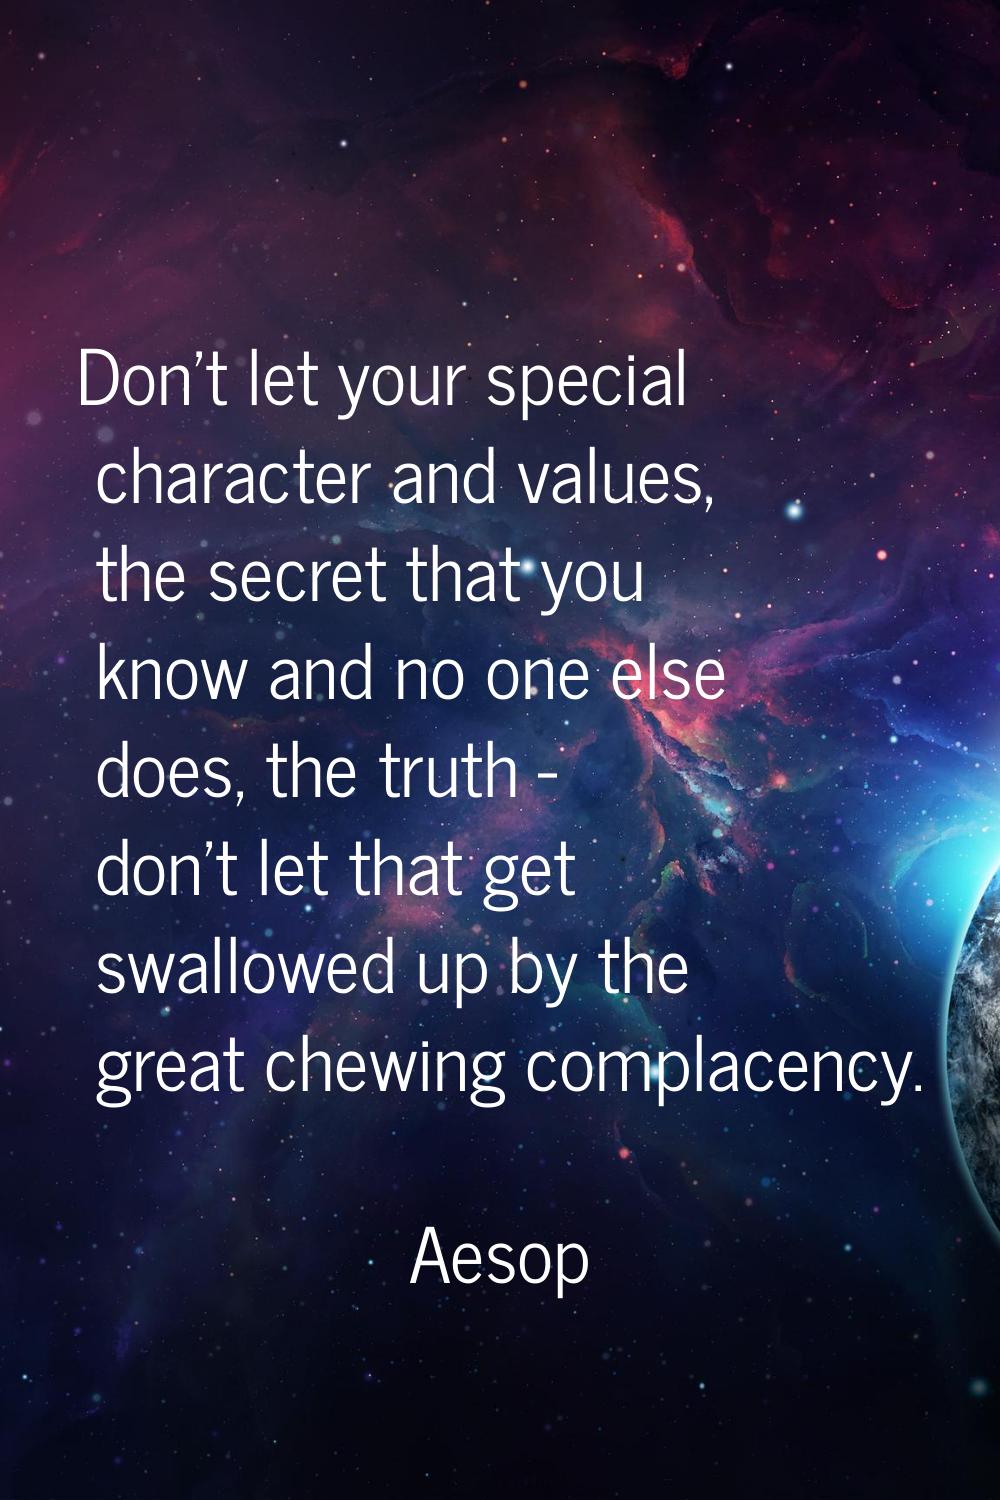 Don't let your special character and values, the secret that you know and no one else does, the tru